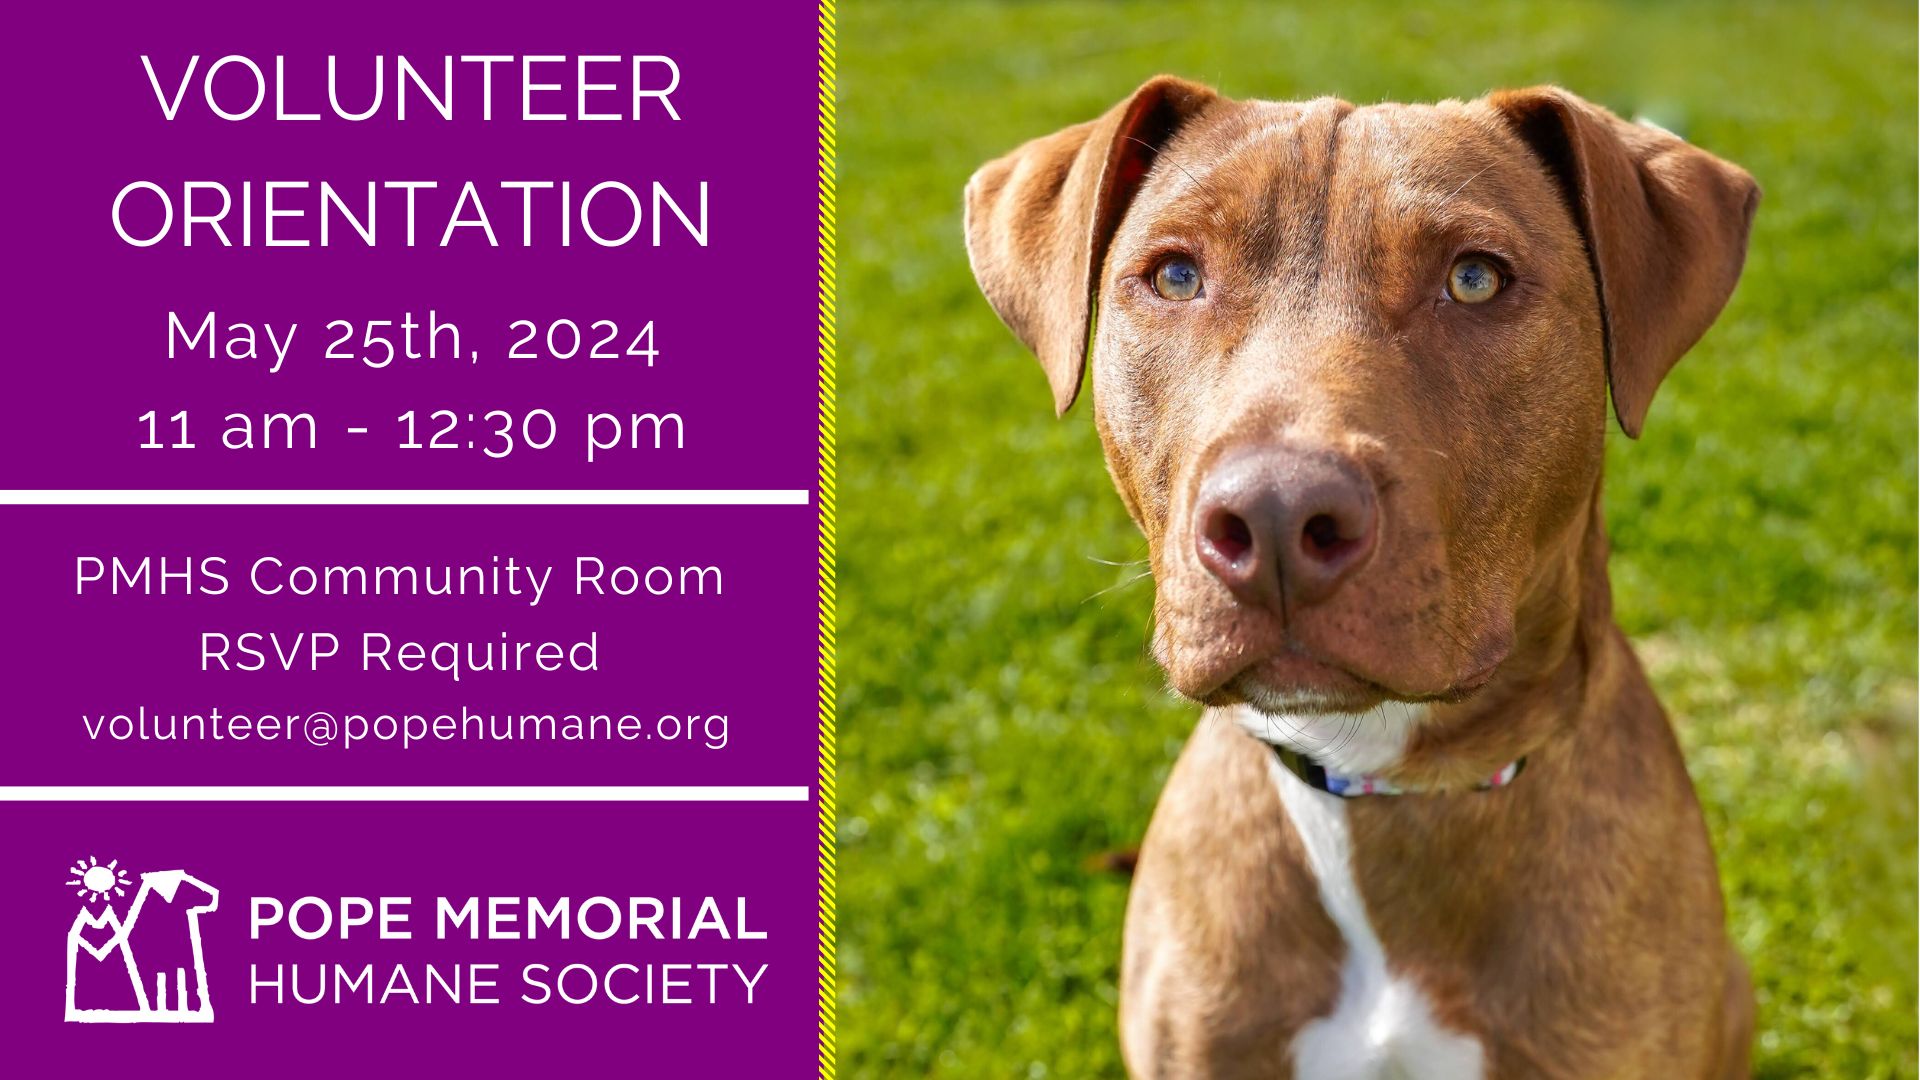 Volunteer Opportunities Await: May Orientation at Pope Memorial Humane Society